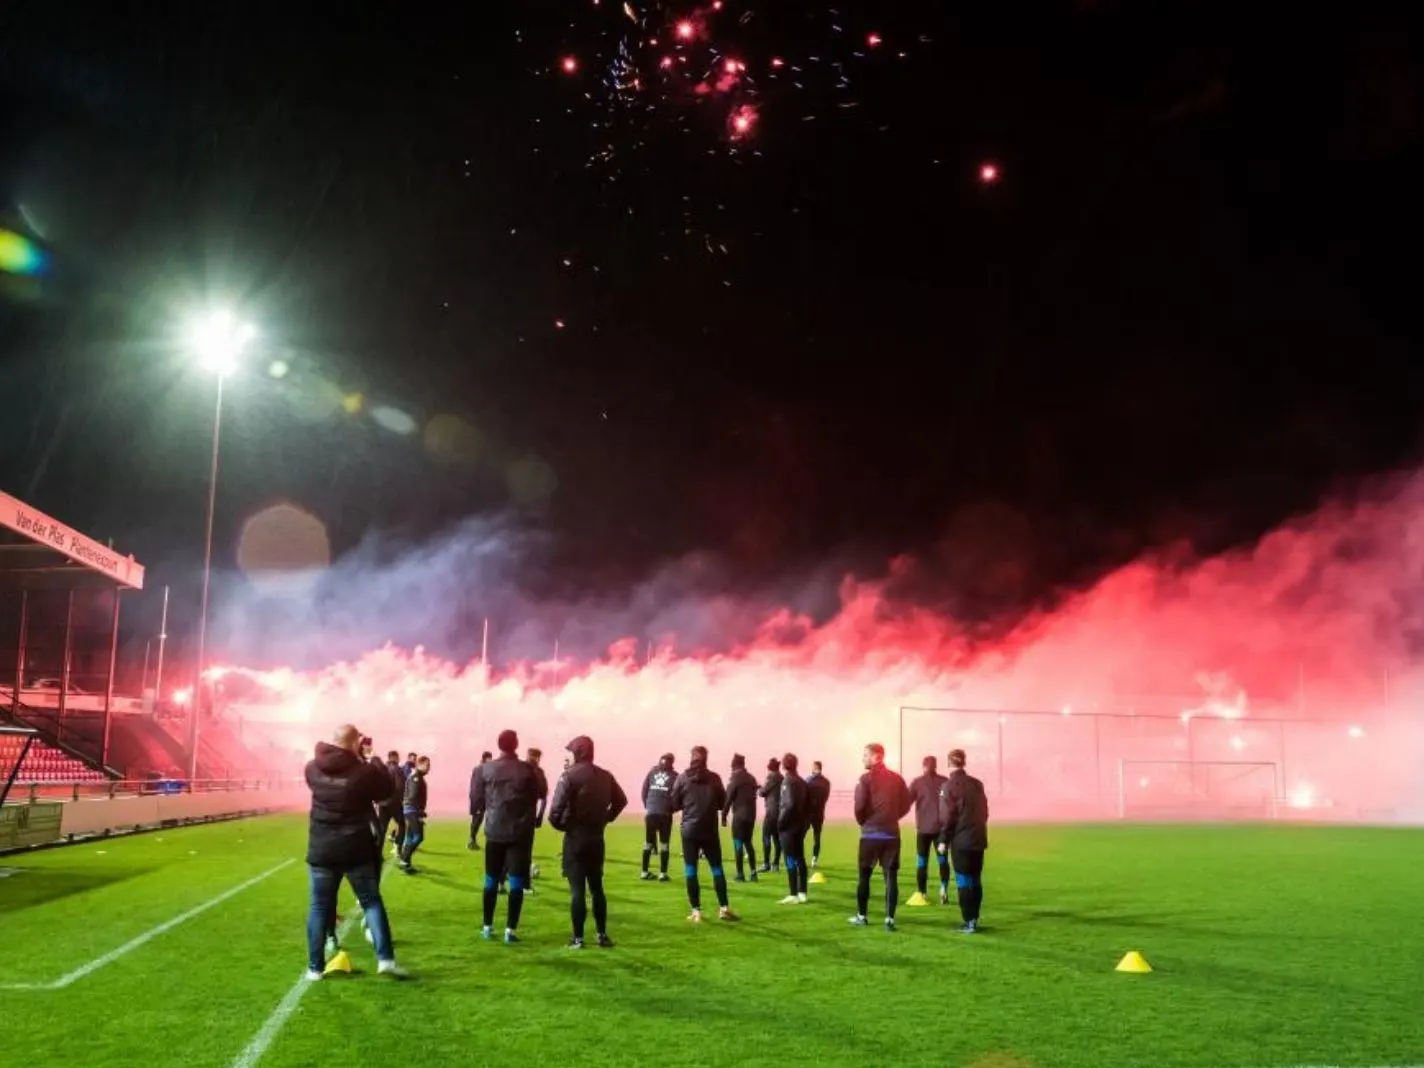 Quick Boys FC fans let off pyroworks during 5 am training session